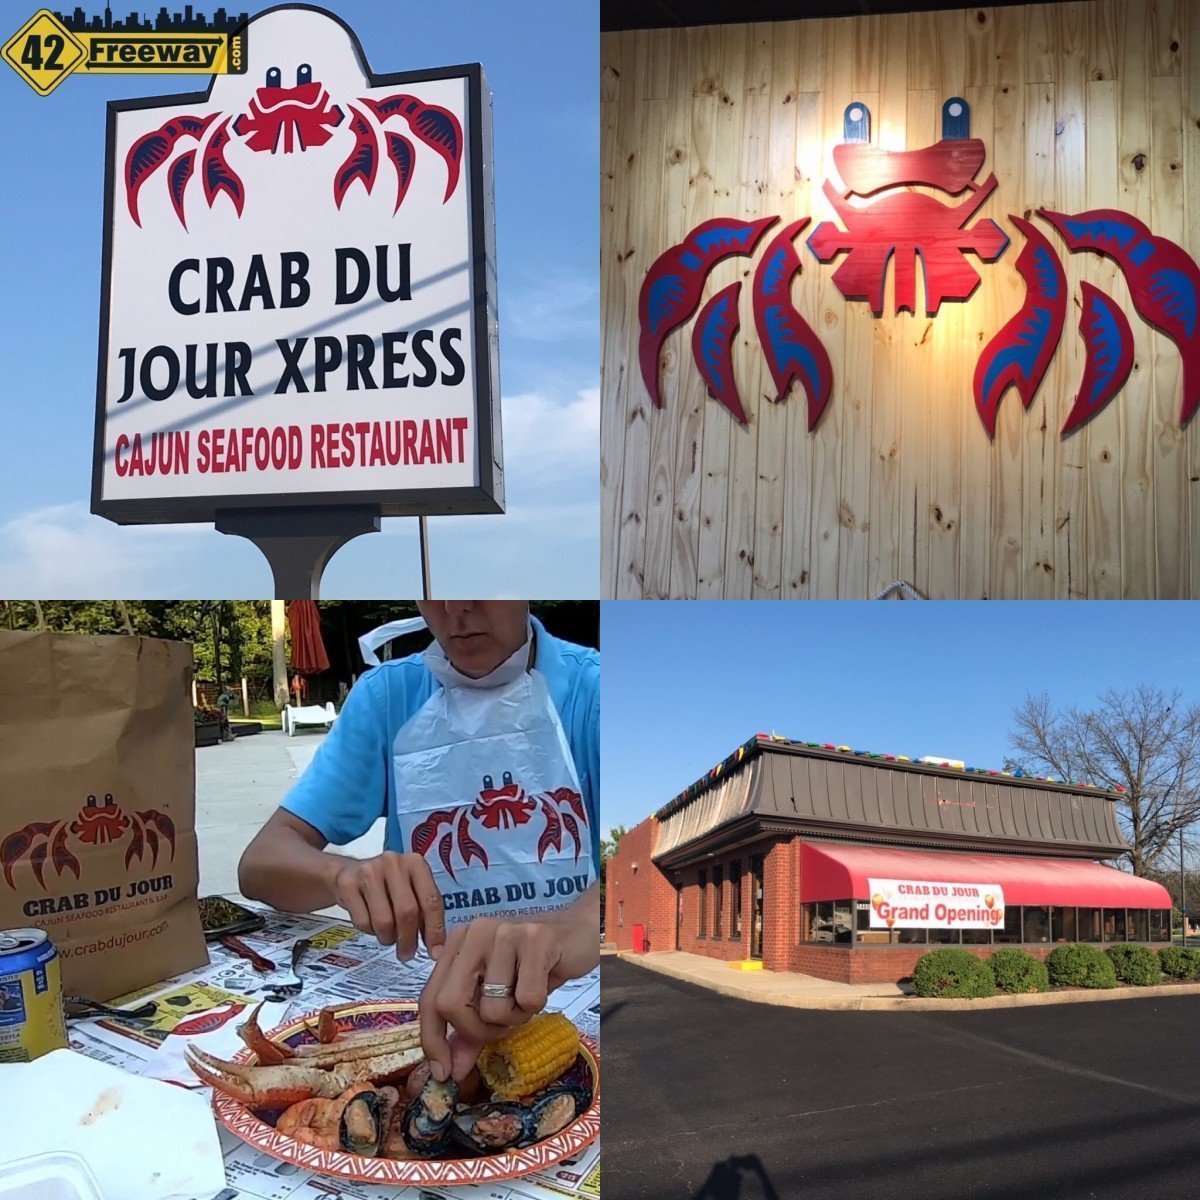 Crab Du Jour has Opened in Turnersville!   42Freeway Experience Video!